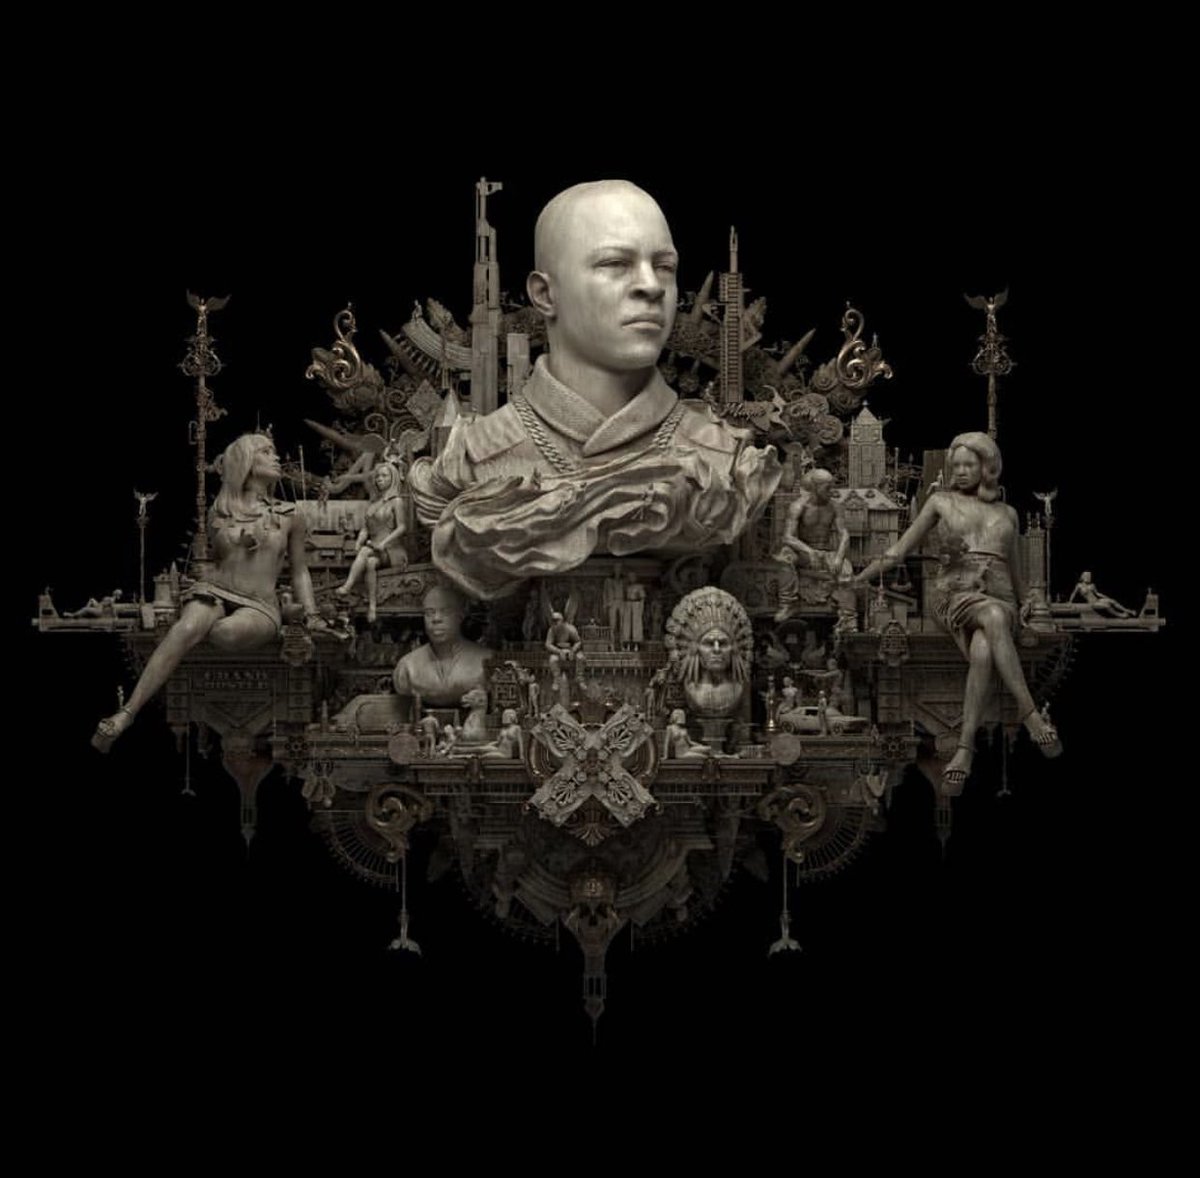 T.I. & Young Thug Are Ready For “The Weekend” In New “Dime Trap” Single